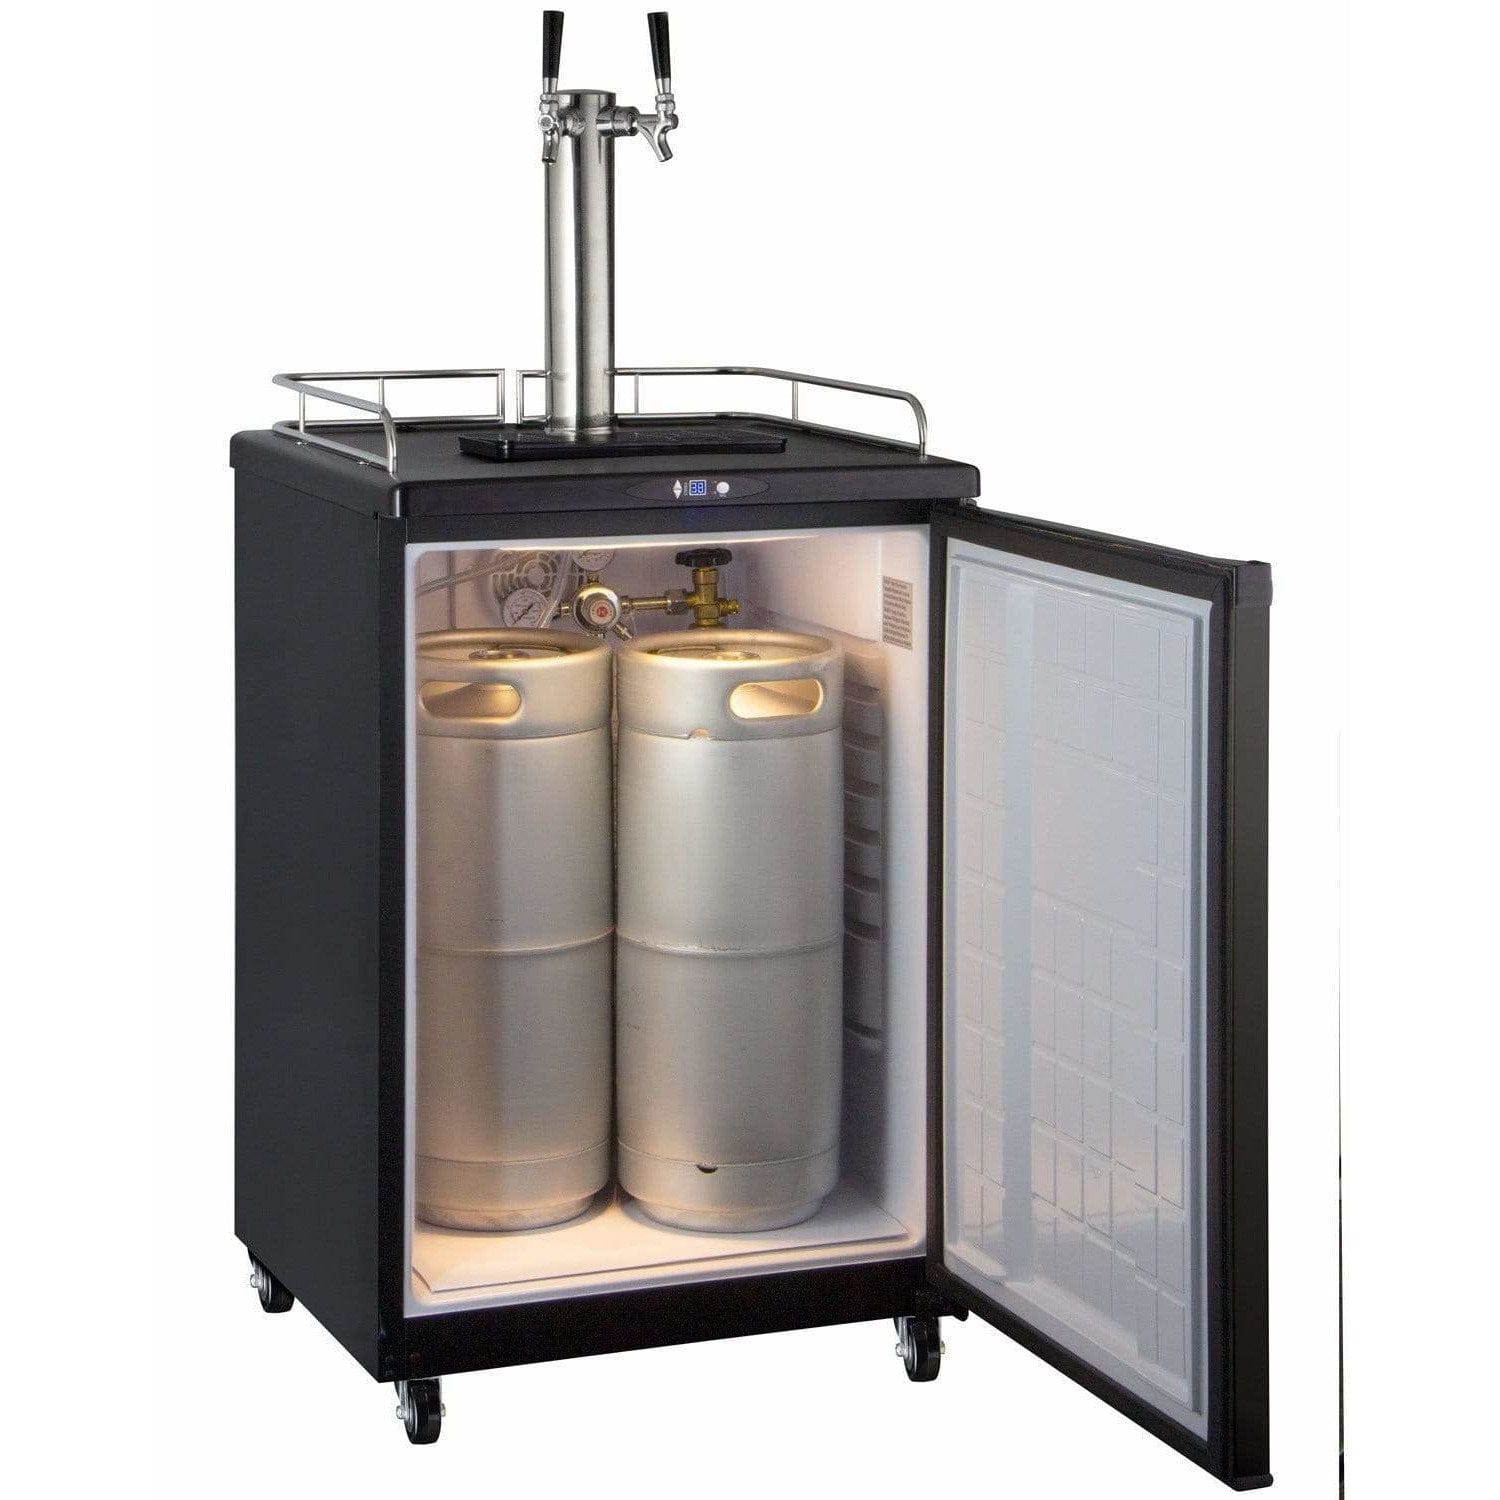 Kegco 24" Wide Cold Brew Coffee Dual Tap Black Kegerator ICZ163B-2 Wine Coolers Empire